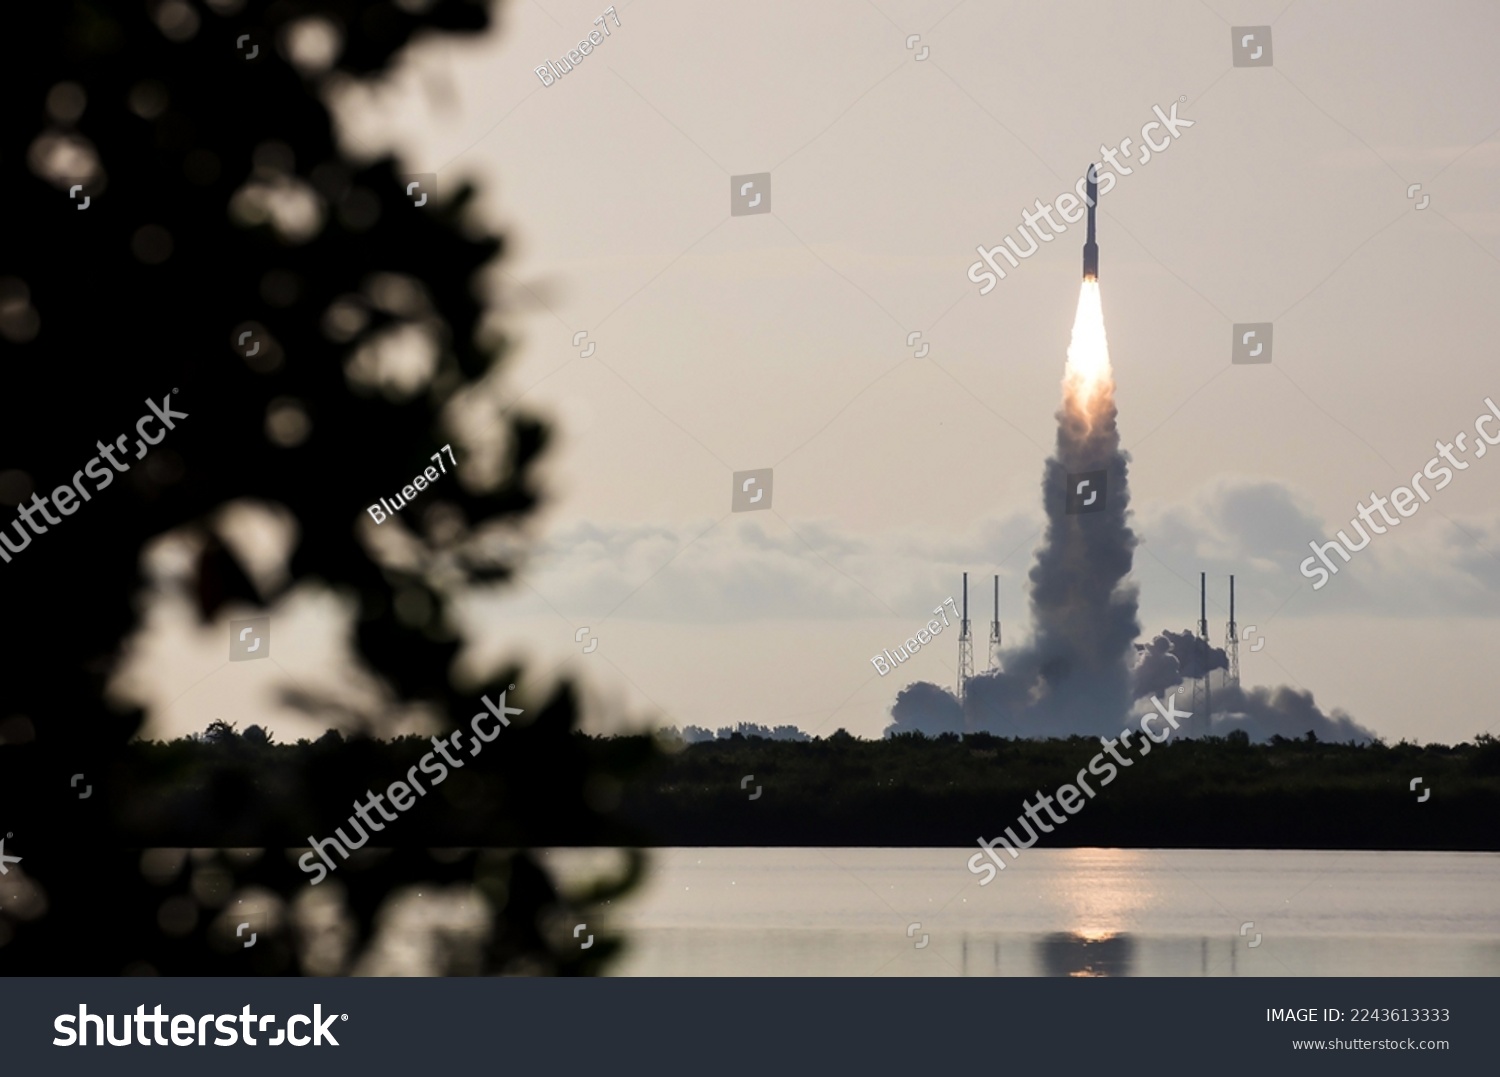 Rocket launching from rocket stage at Cape Canaveral, FL. Digitally enhanced. Elements of this image furnished by NASA. #2243613333